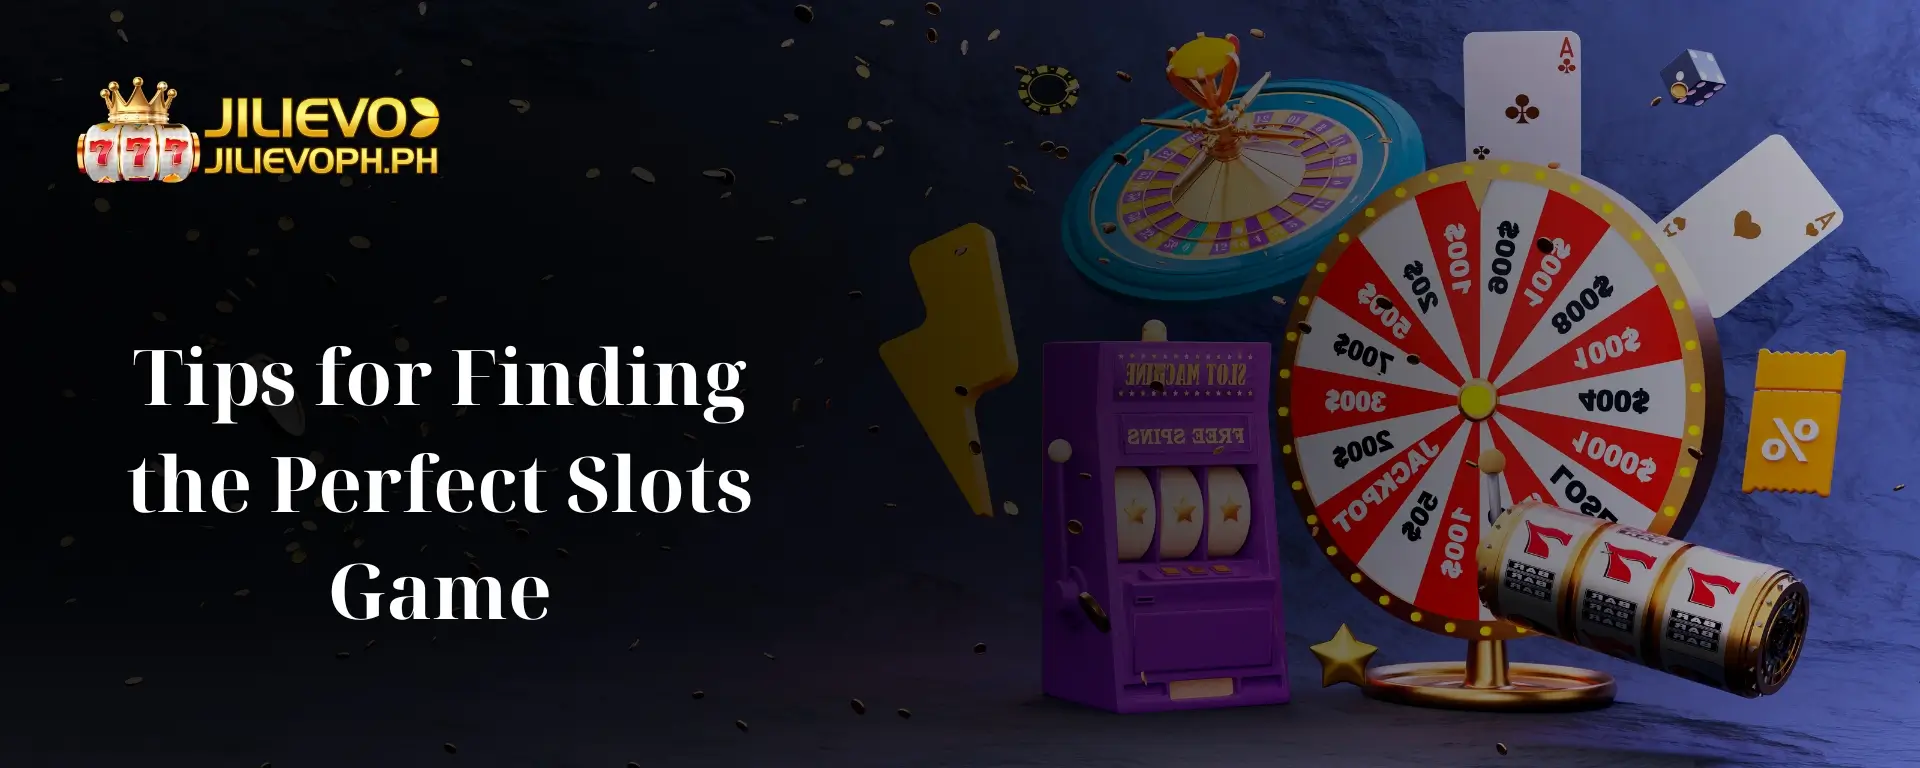 Tips for Finding the Perfect Slots Game